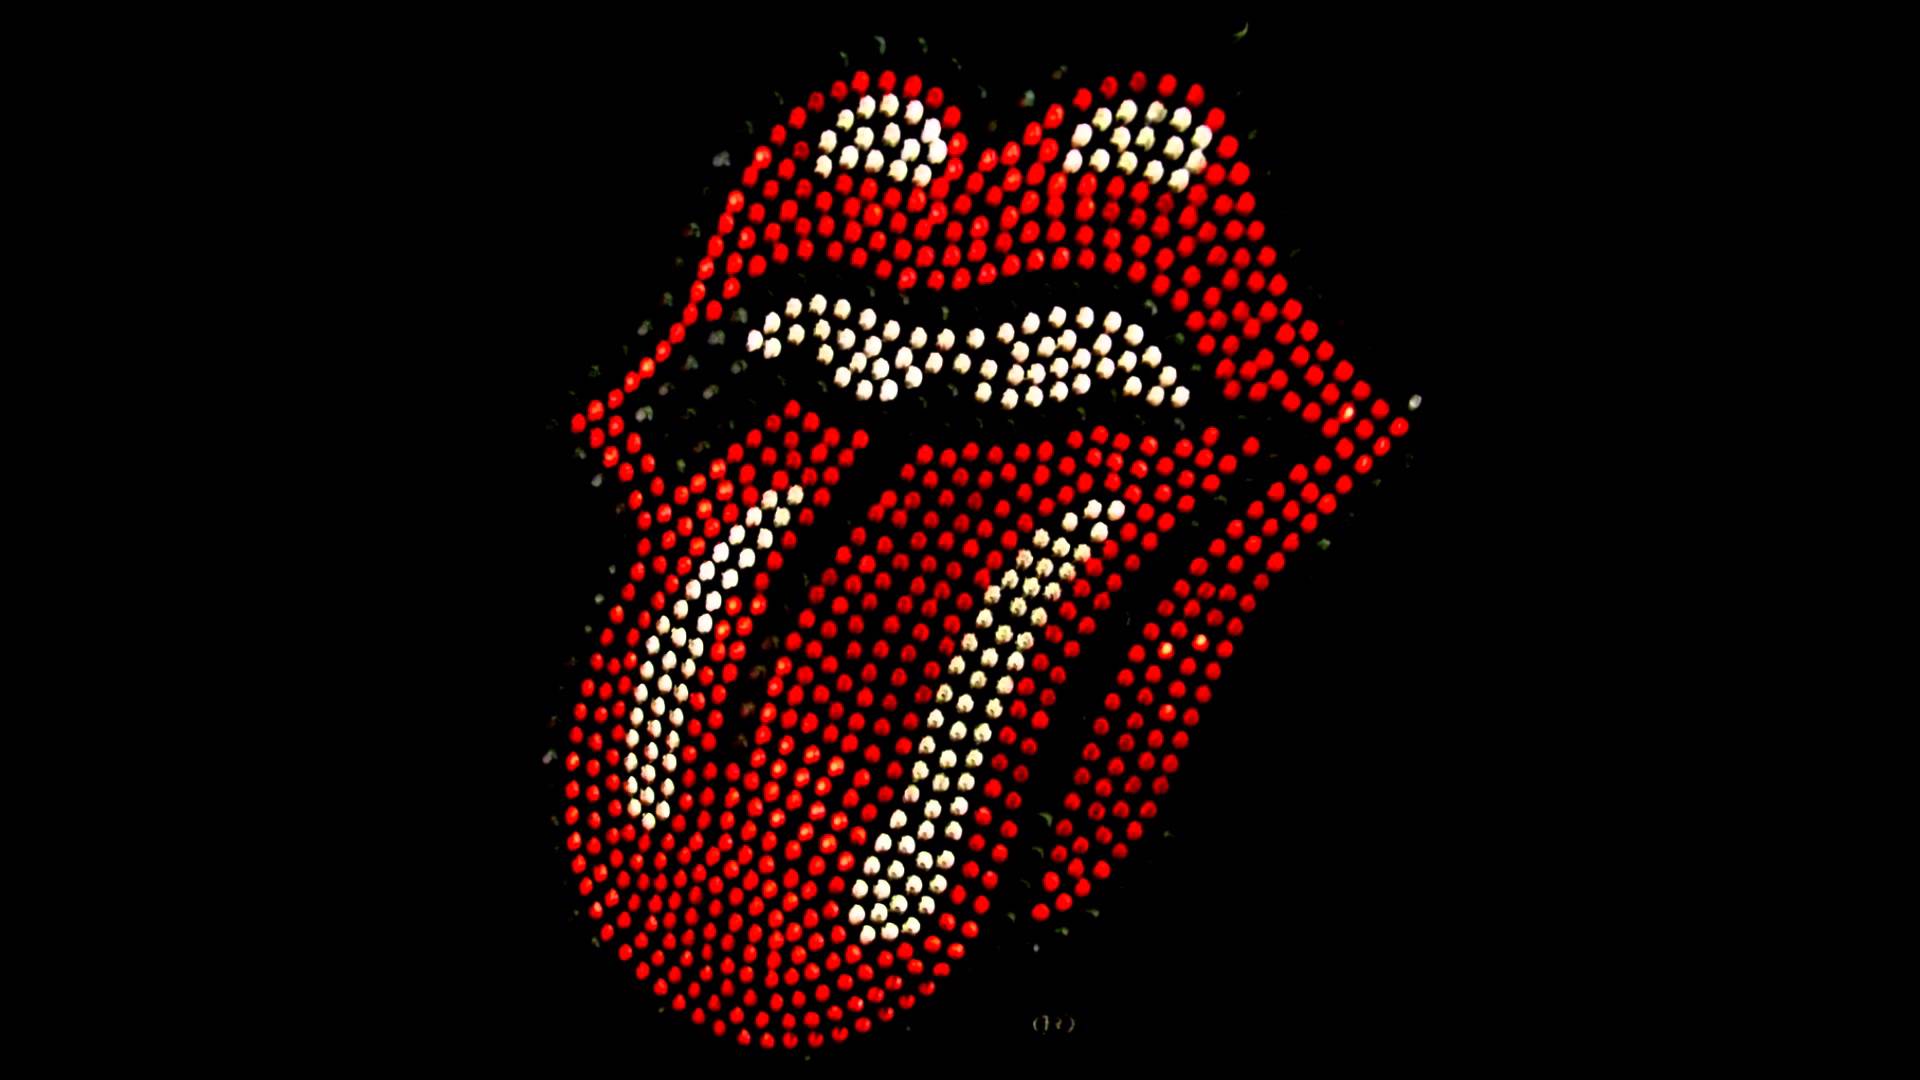 The Rolling Stones HD Wallpapers for desktop download